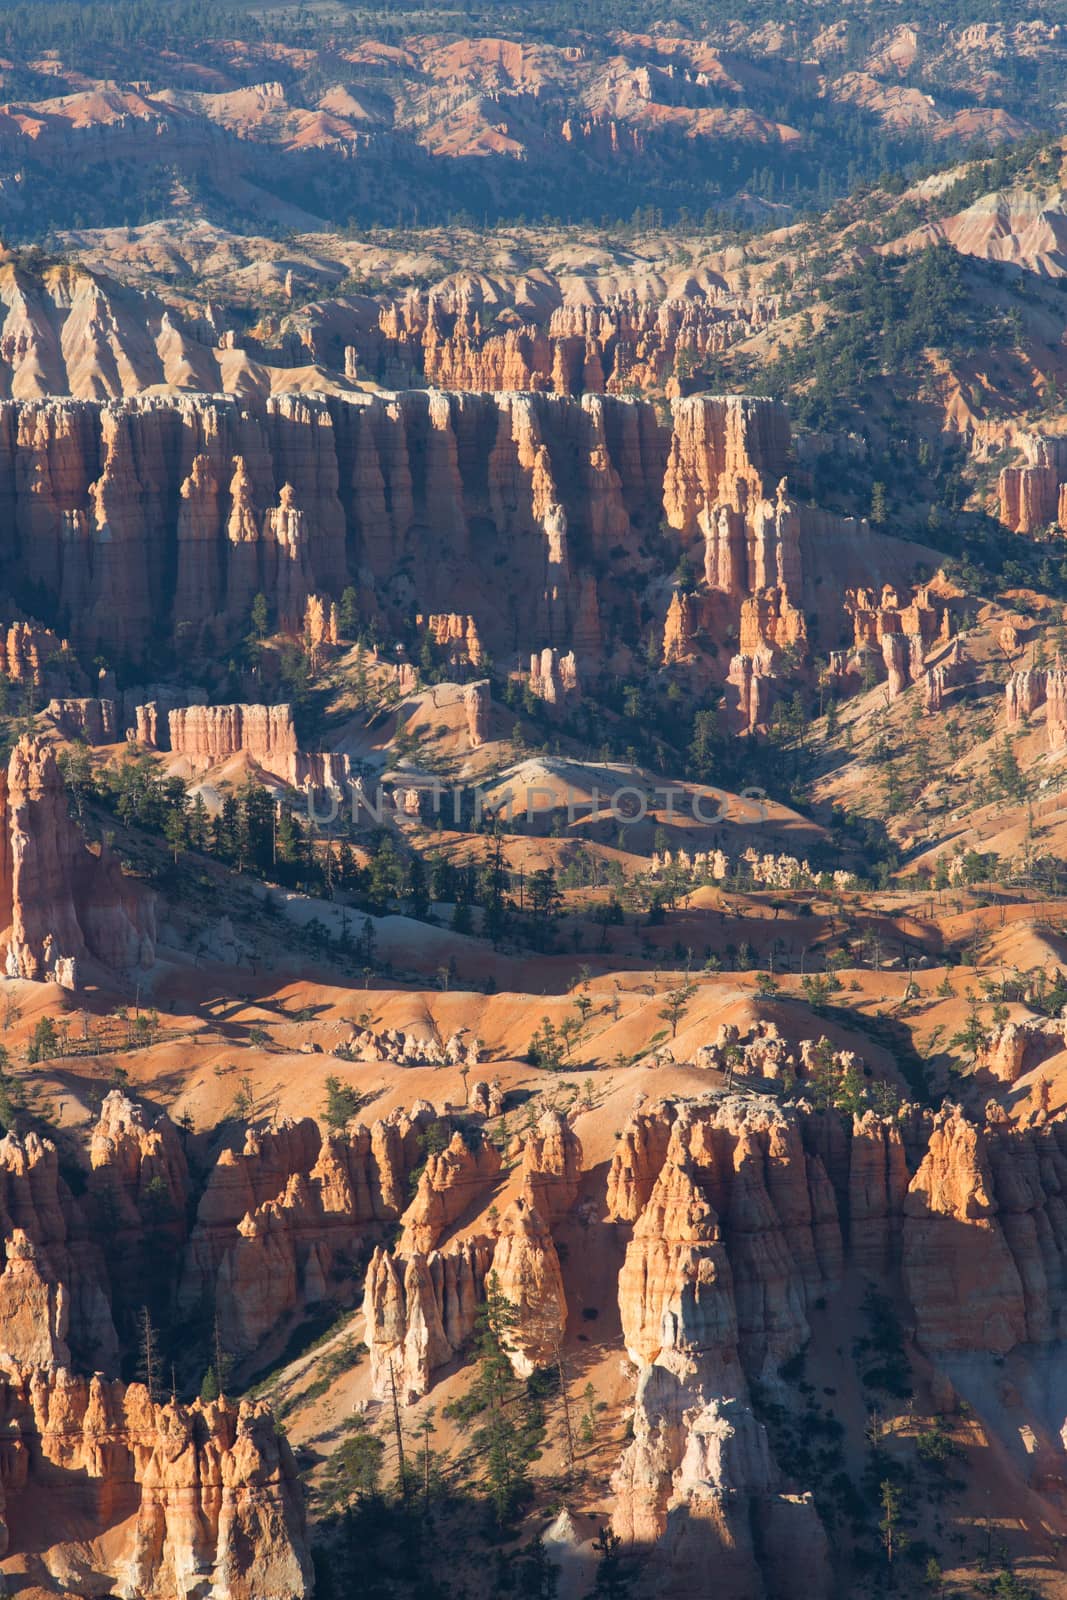 Amphitheatres of Bryce Canyon by watchtheworld